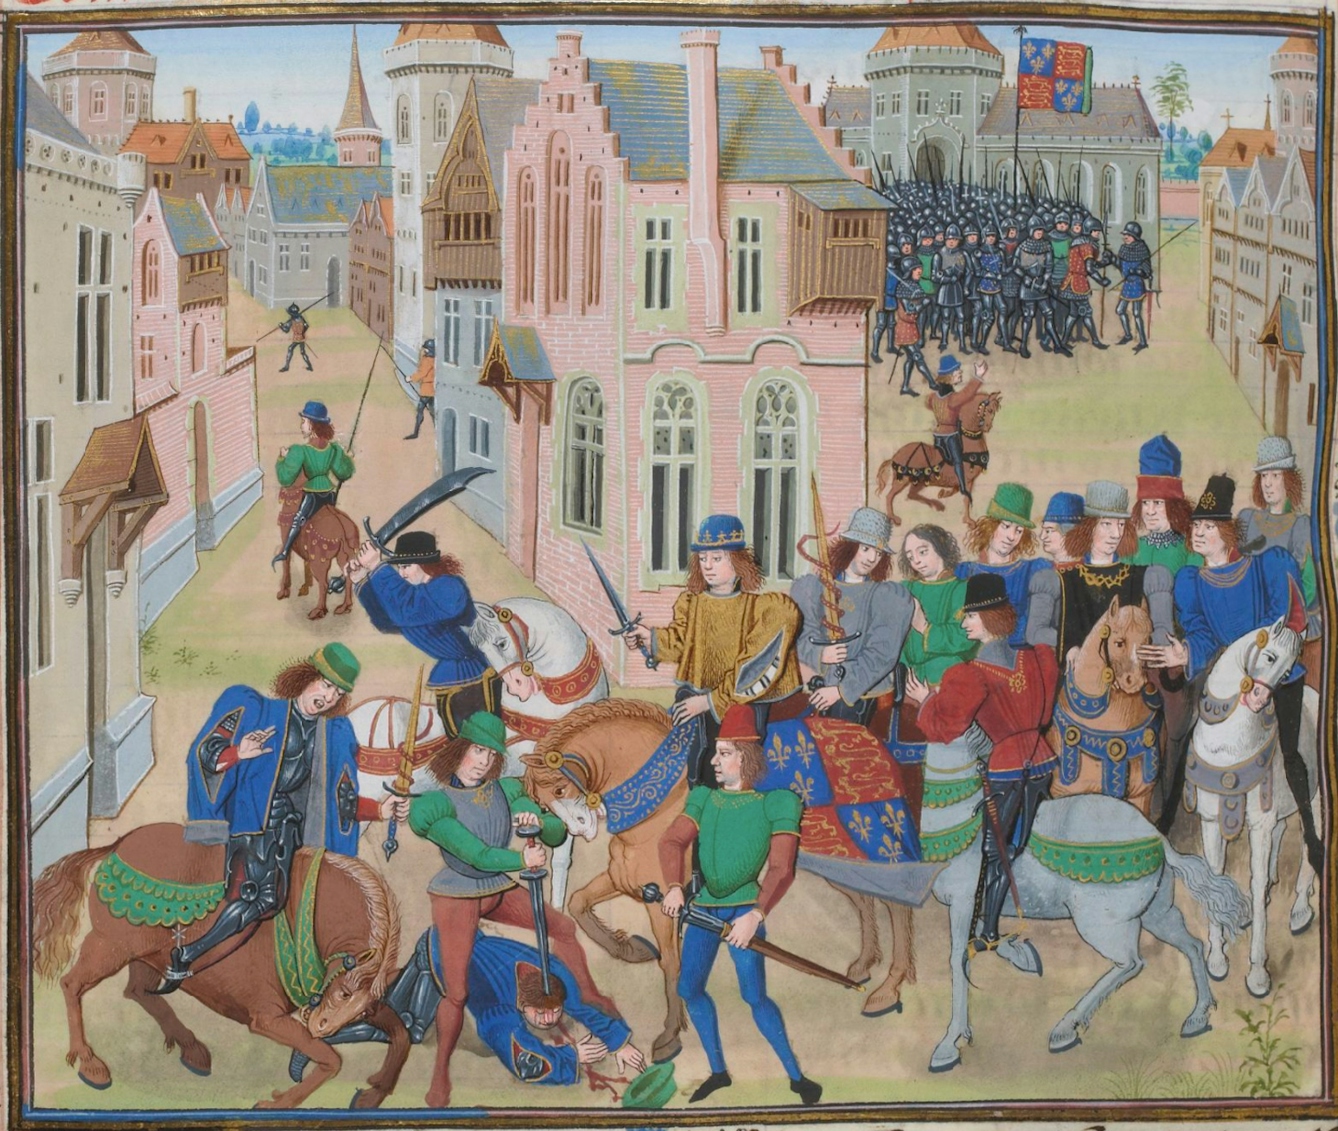 Colour illustration showing a battle with men on foot and on horse back. In the foreground a man lies on the ground while being stabbed by another man with a sword.